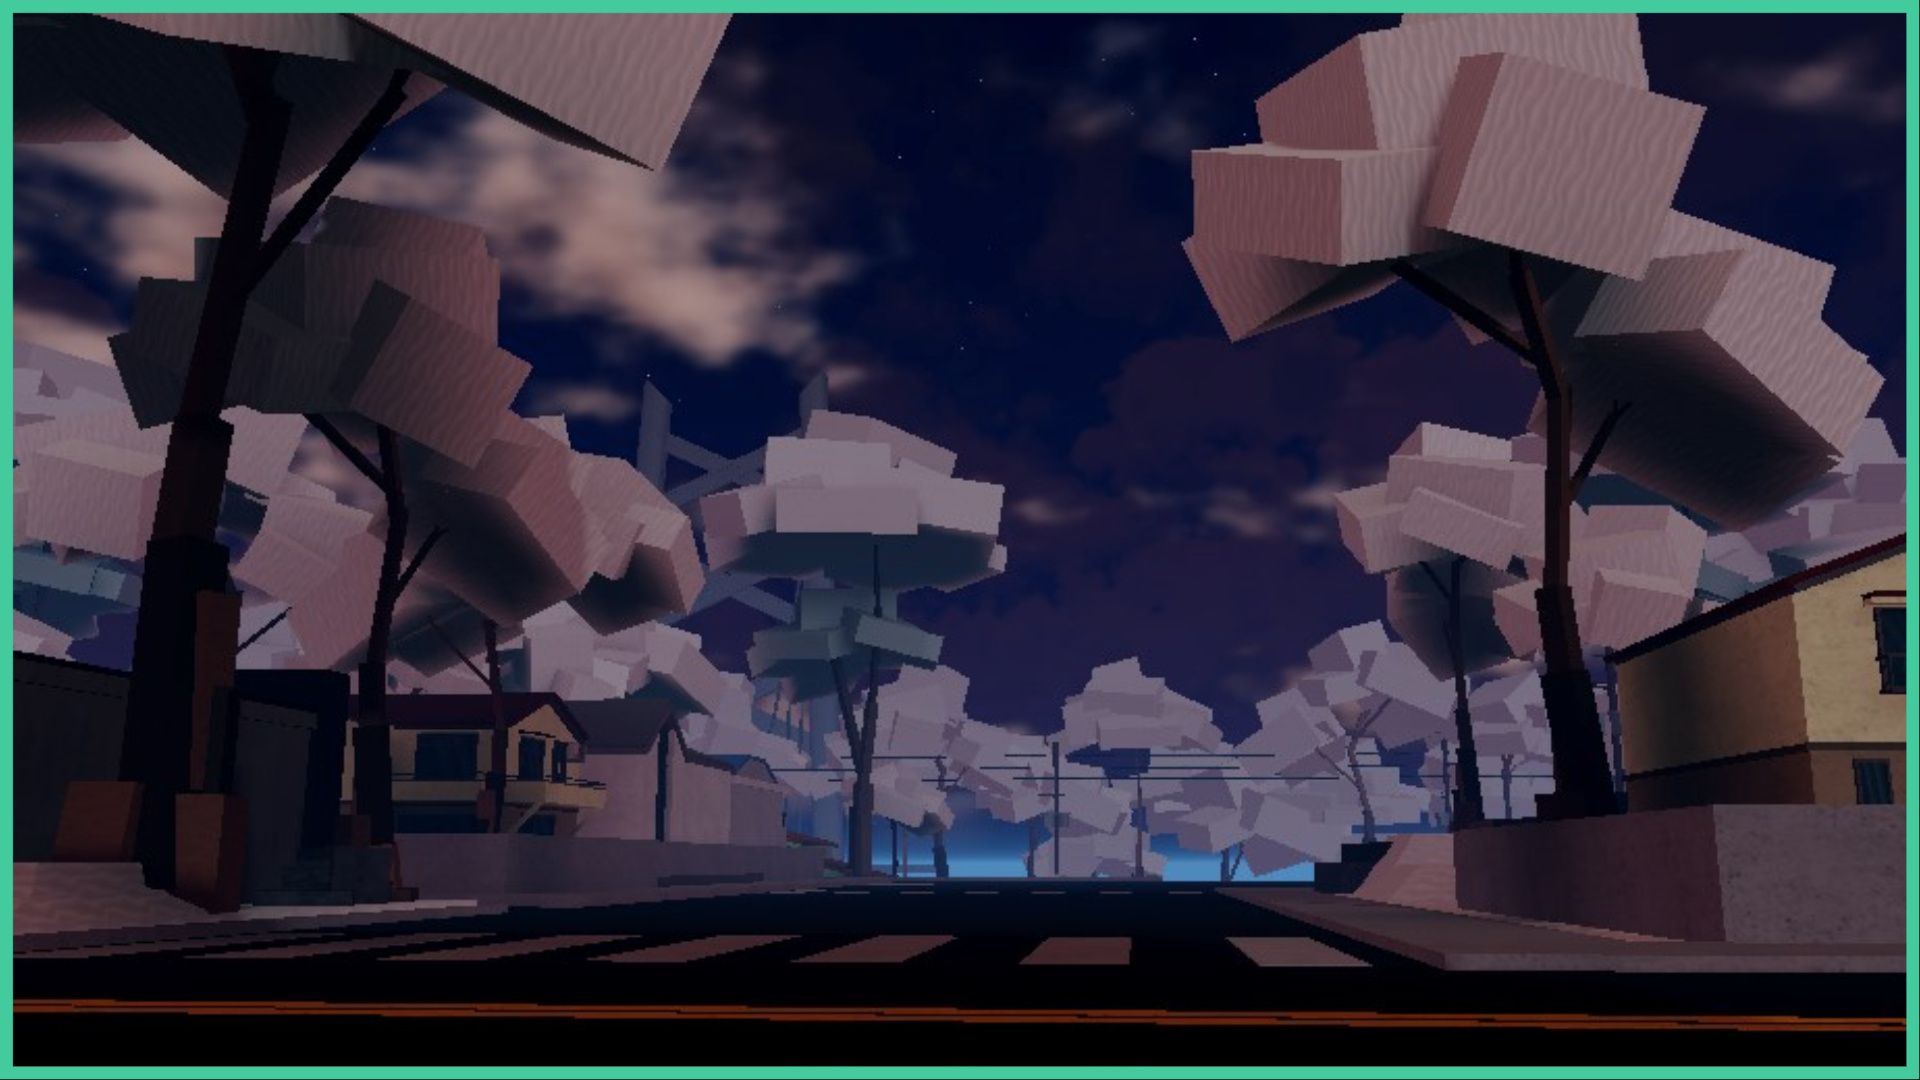 feature image for our peroxide codes, the image features a screenshot of karakura town with trees covered in snow and a road that stretches out toward the seafront, there are houses on either side of the road as dusk falls and clouds fill the sky